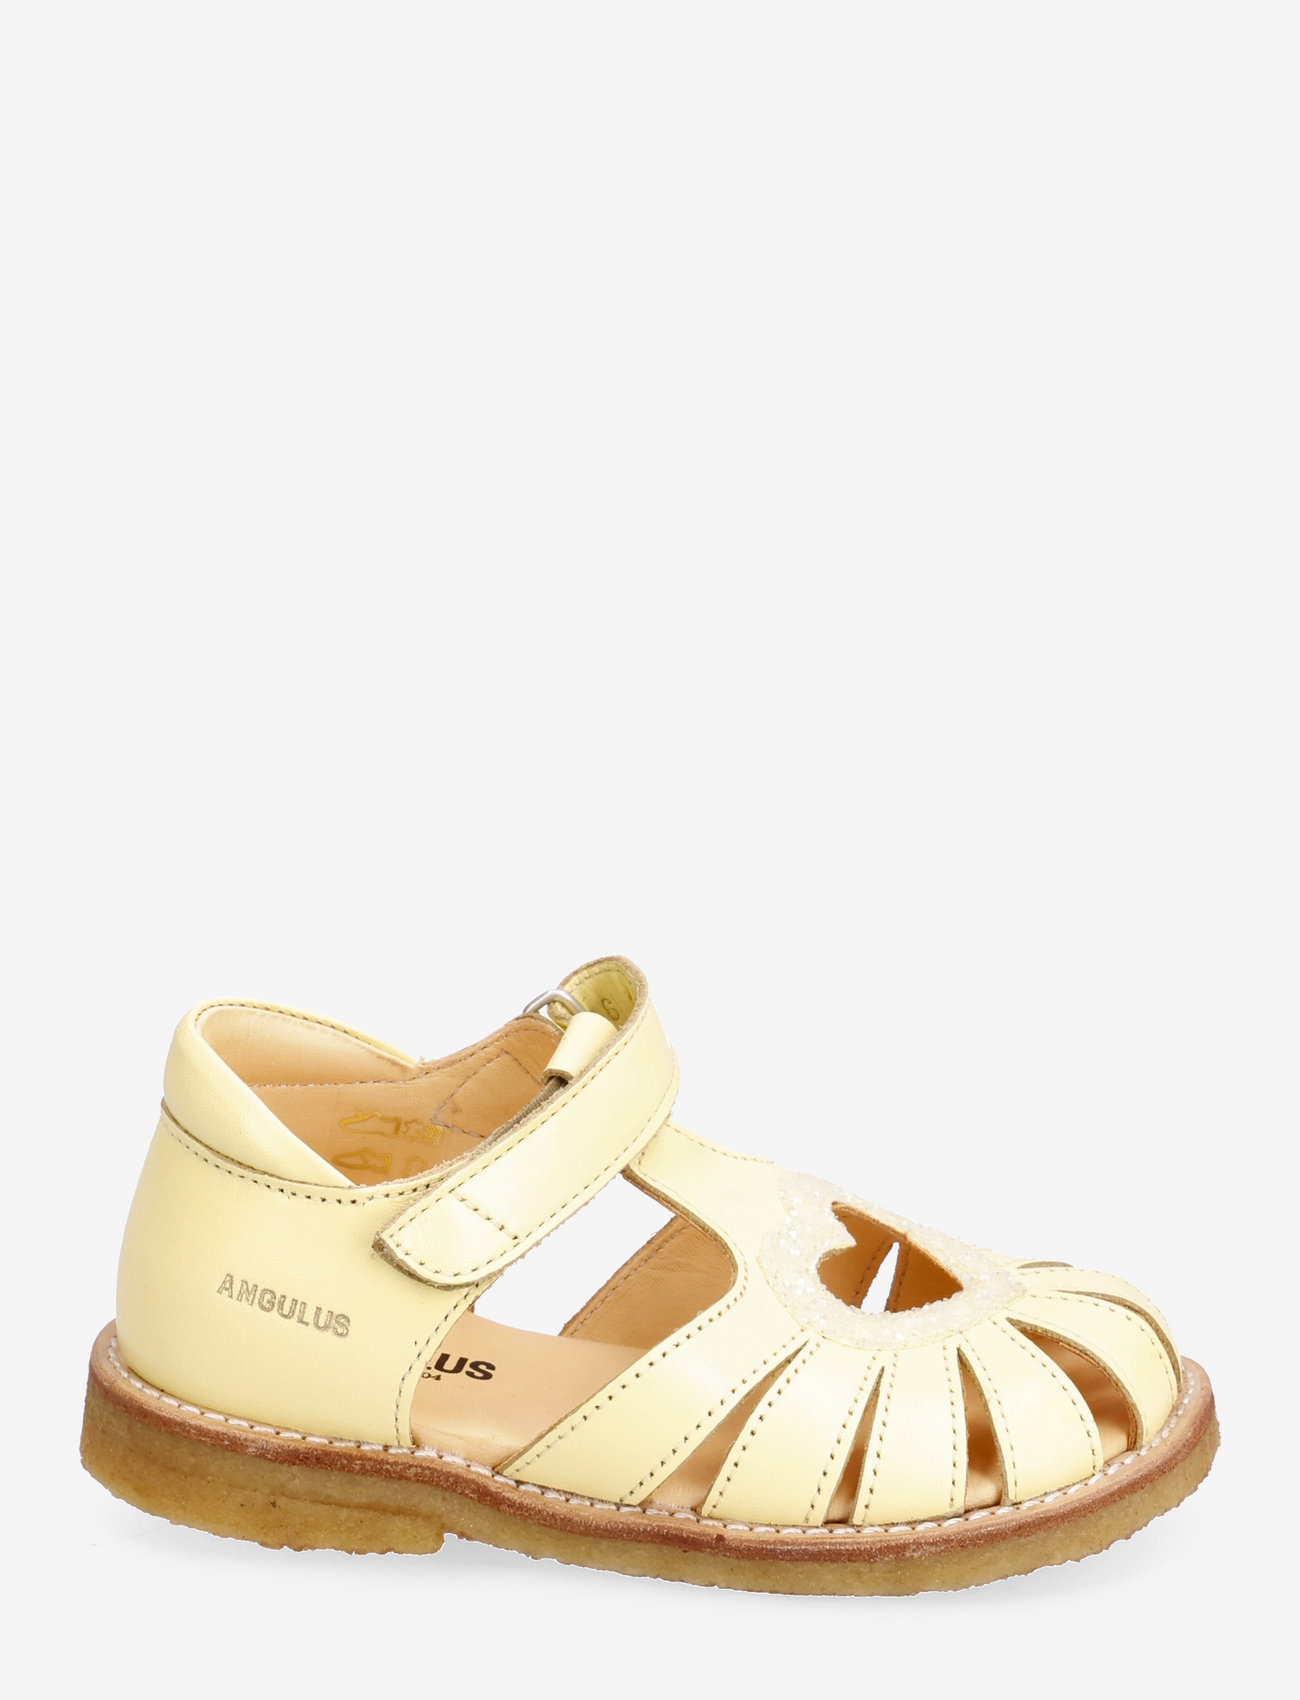 ANGULUS - Sandals - flat - closed toe - - sommerkupp - 1495/2696 ligth yellow/ligth y - 1